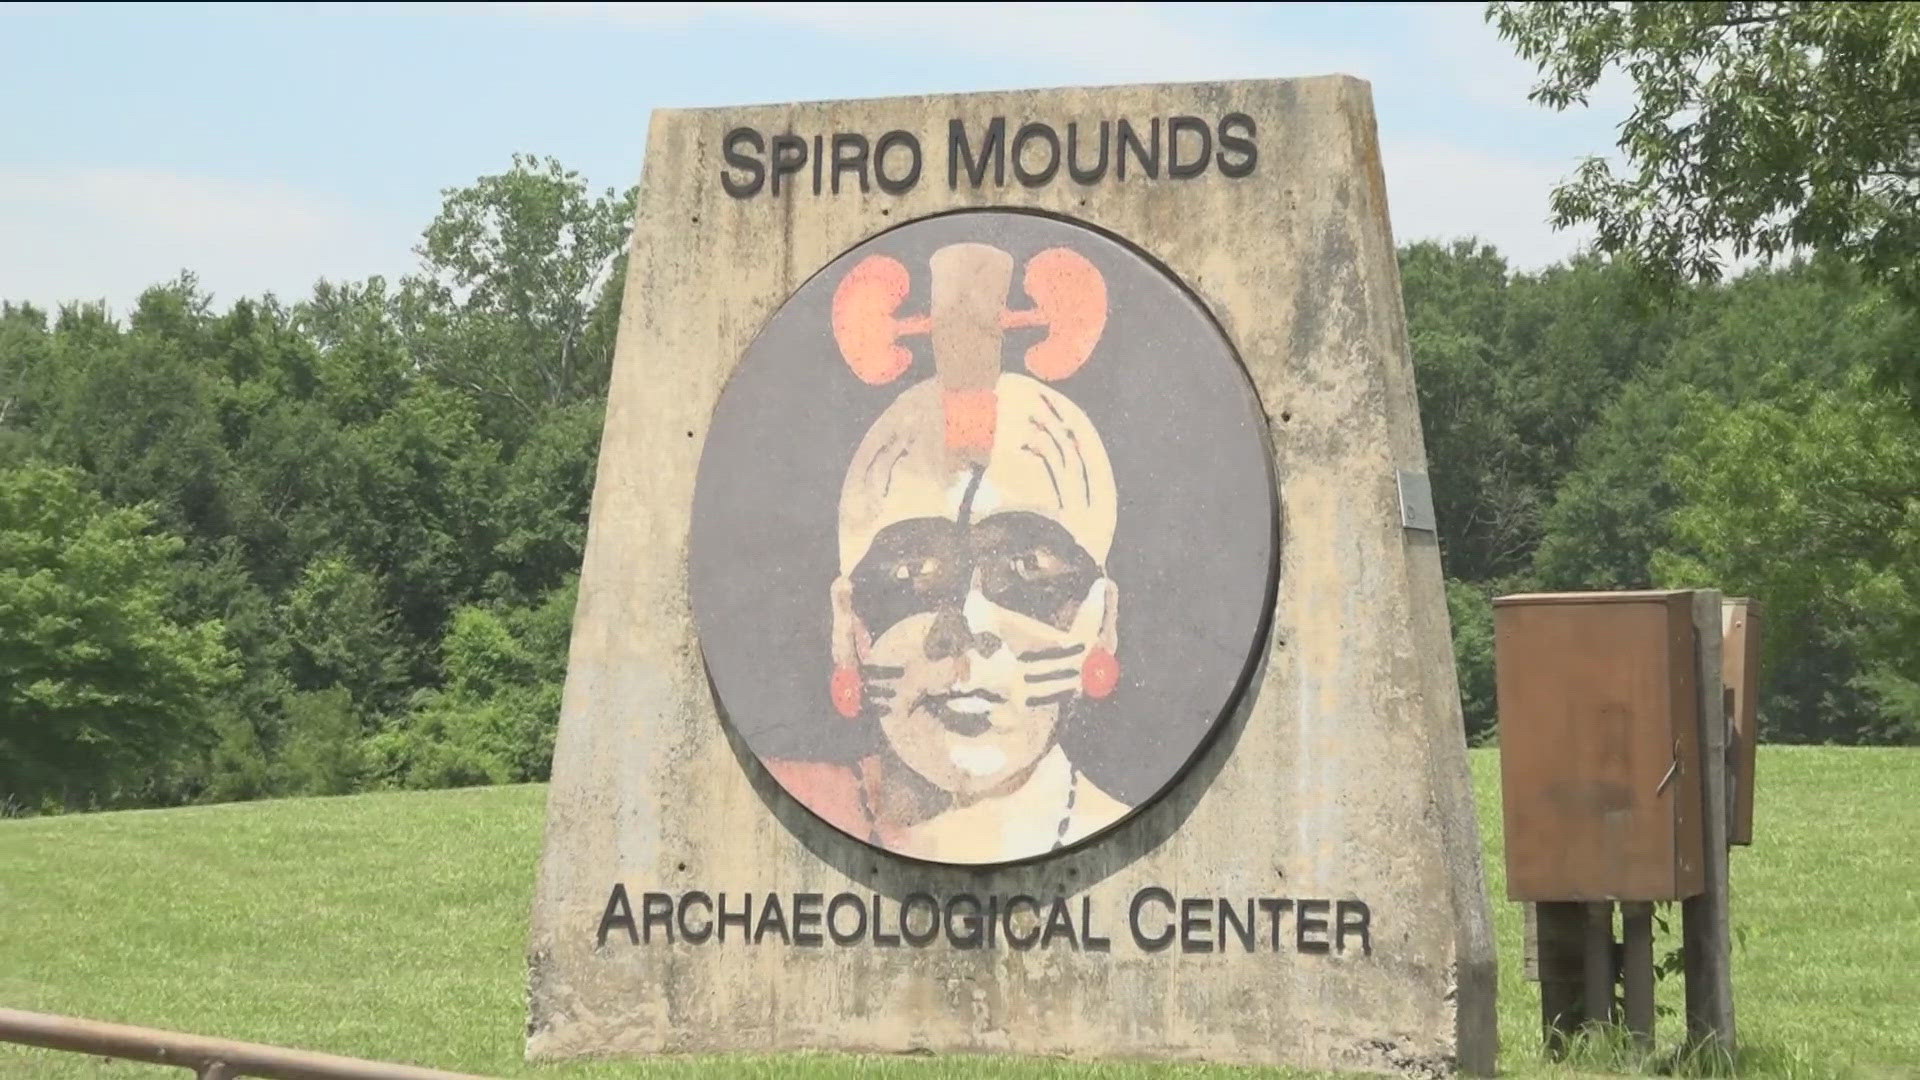 THE SPRIO MOUNDS ARCHAEOLOGICAL CENTER IS THE ONLY SITE OF IT'S KIND OPEN TO THE PUBLIC IN OKLAHOMA...